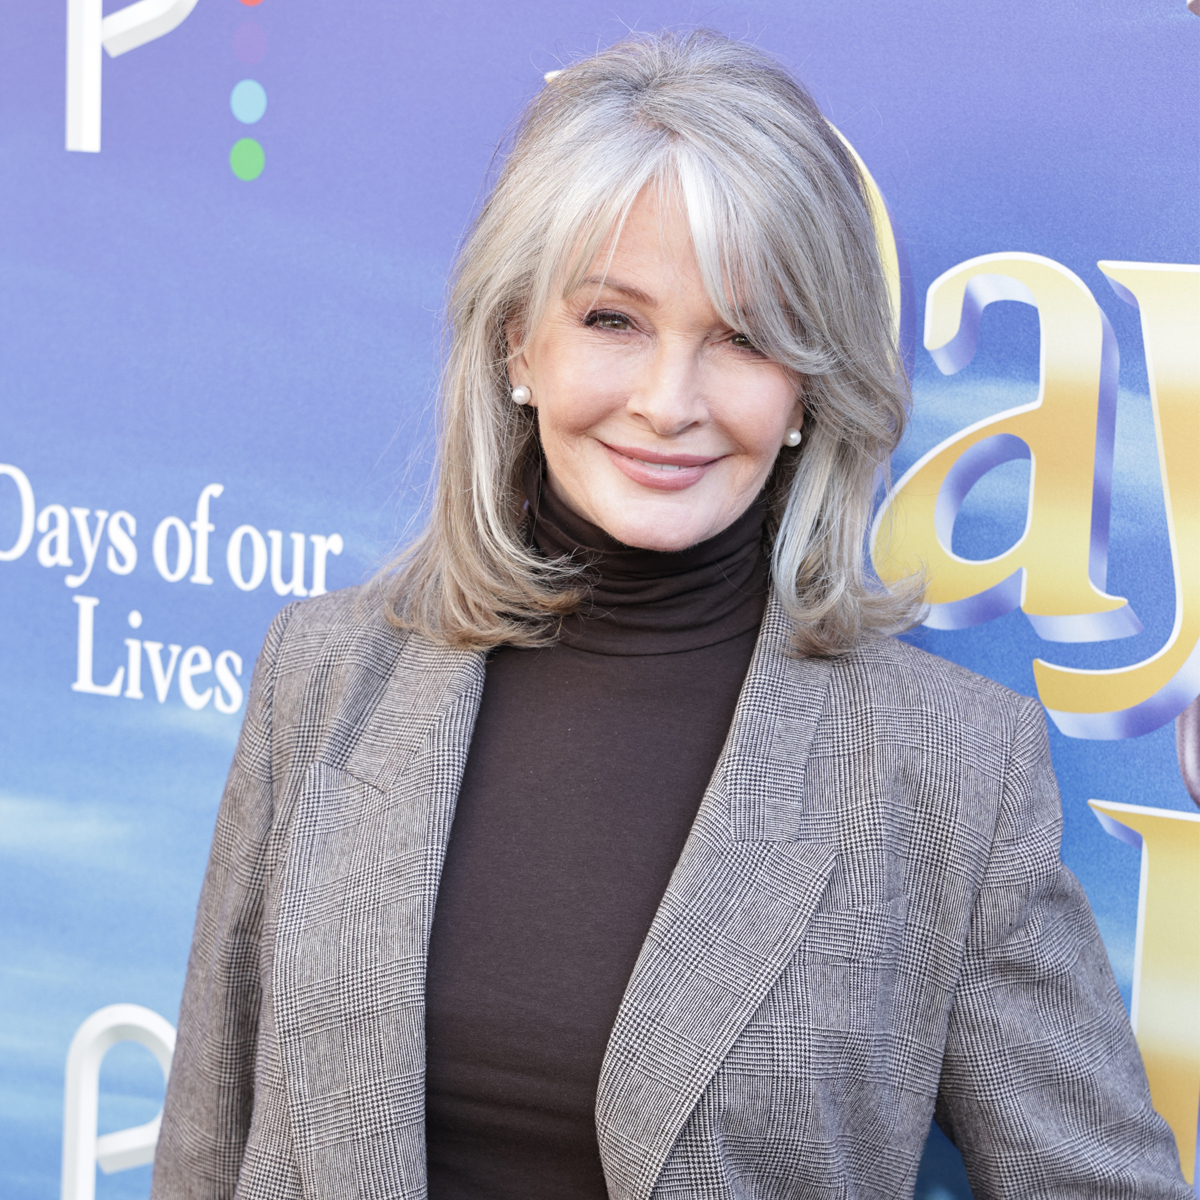 See How Days of Our Lives Honored Deidre Hall’s 5,000th Episode